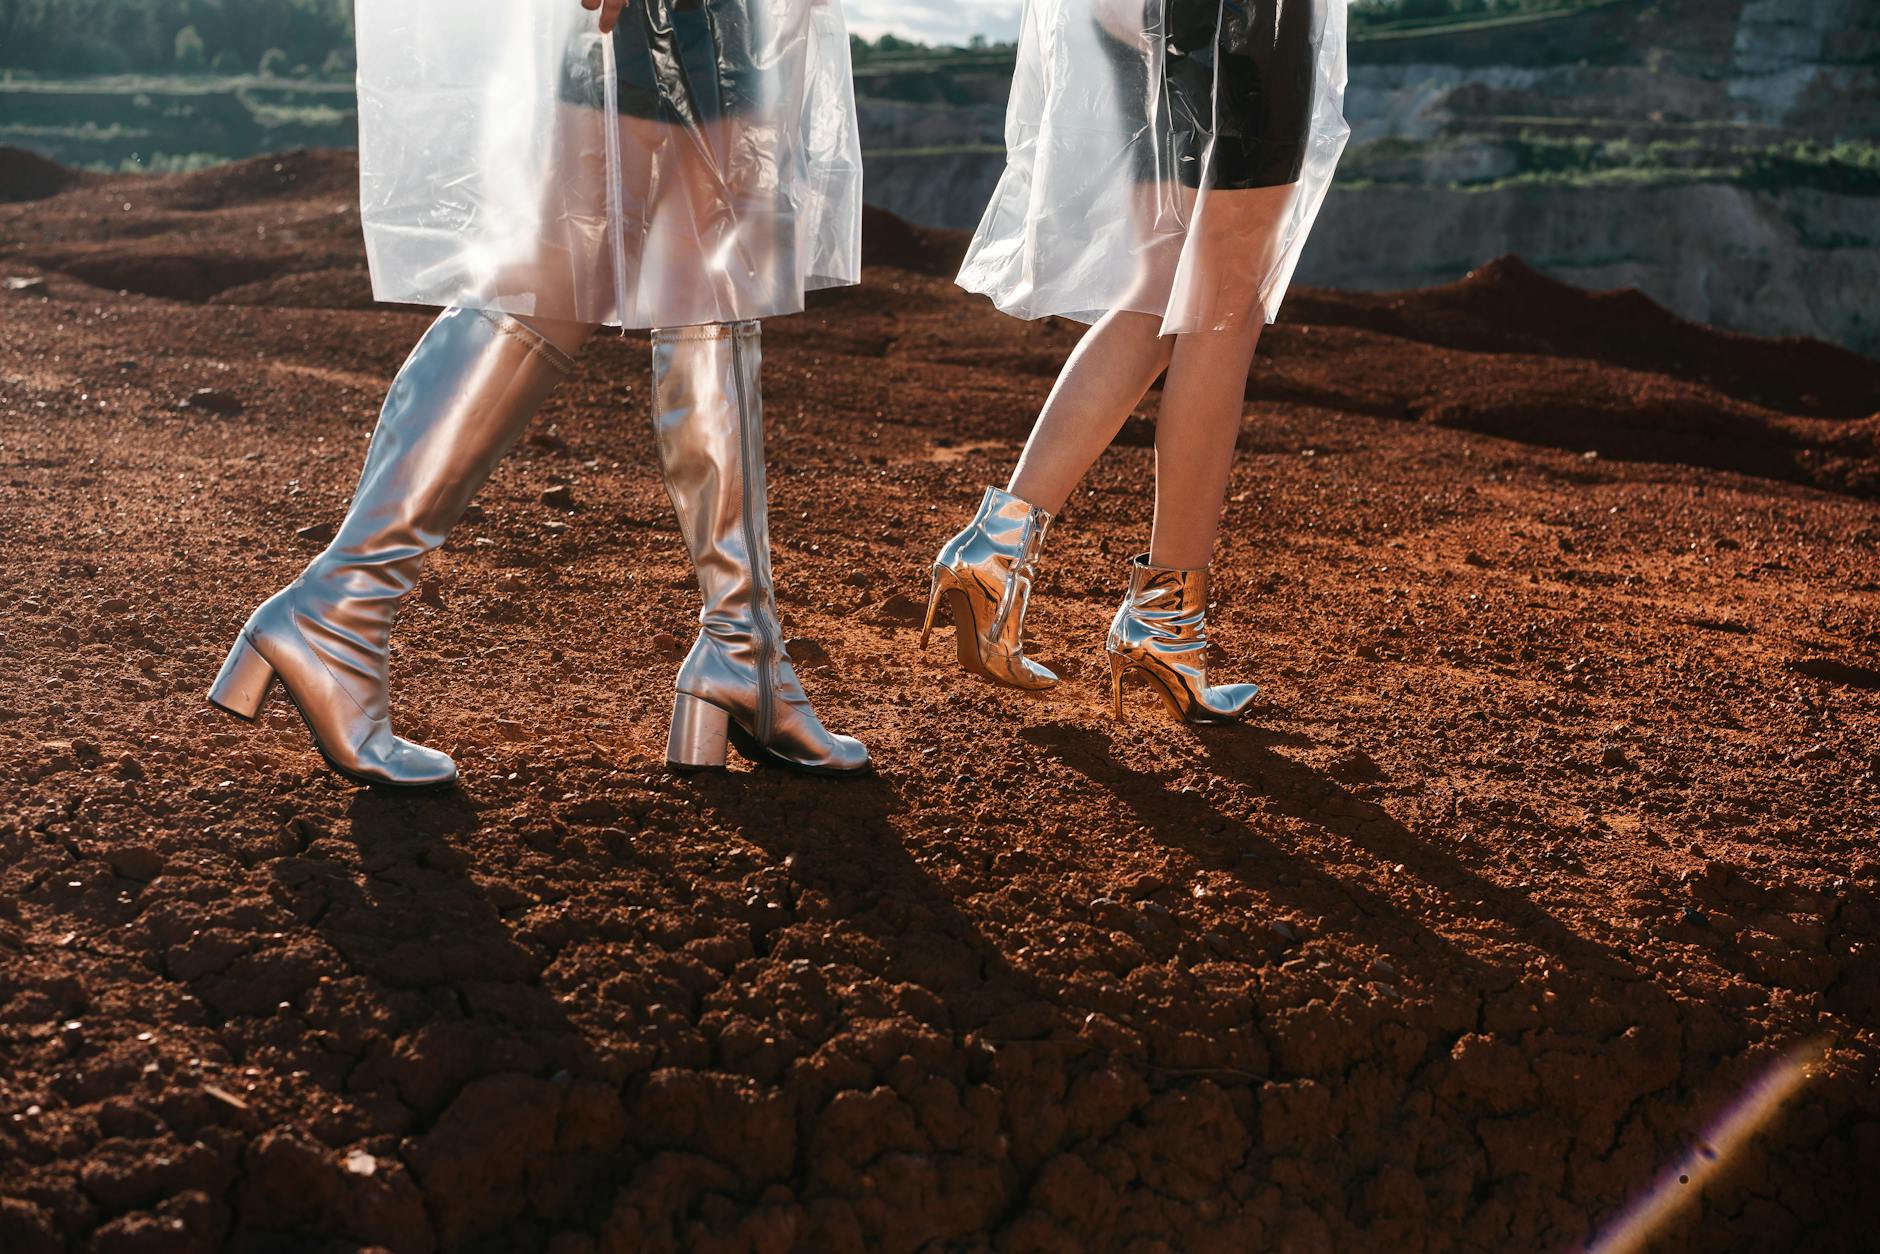 Knee Level Shot of Women in Trendy Outfits and Silver Boots